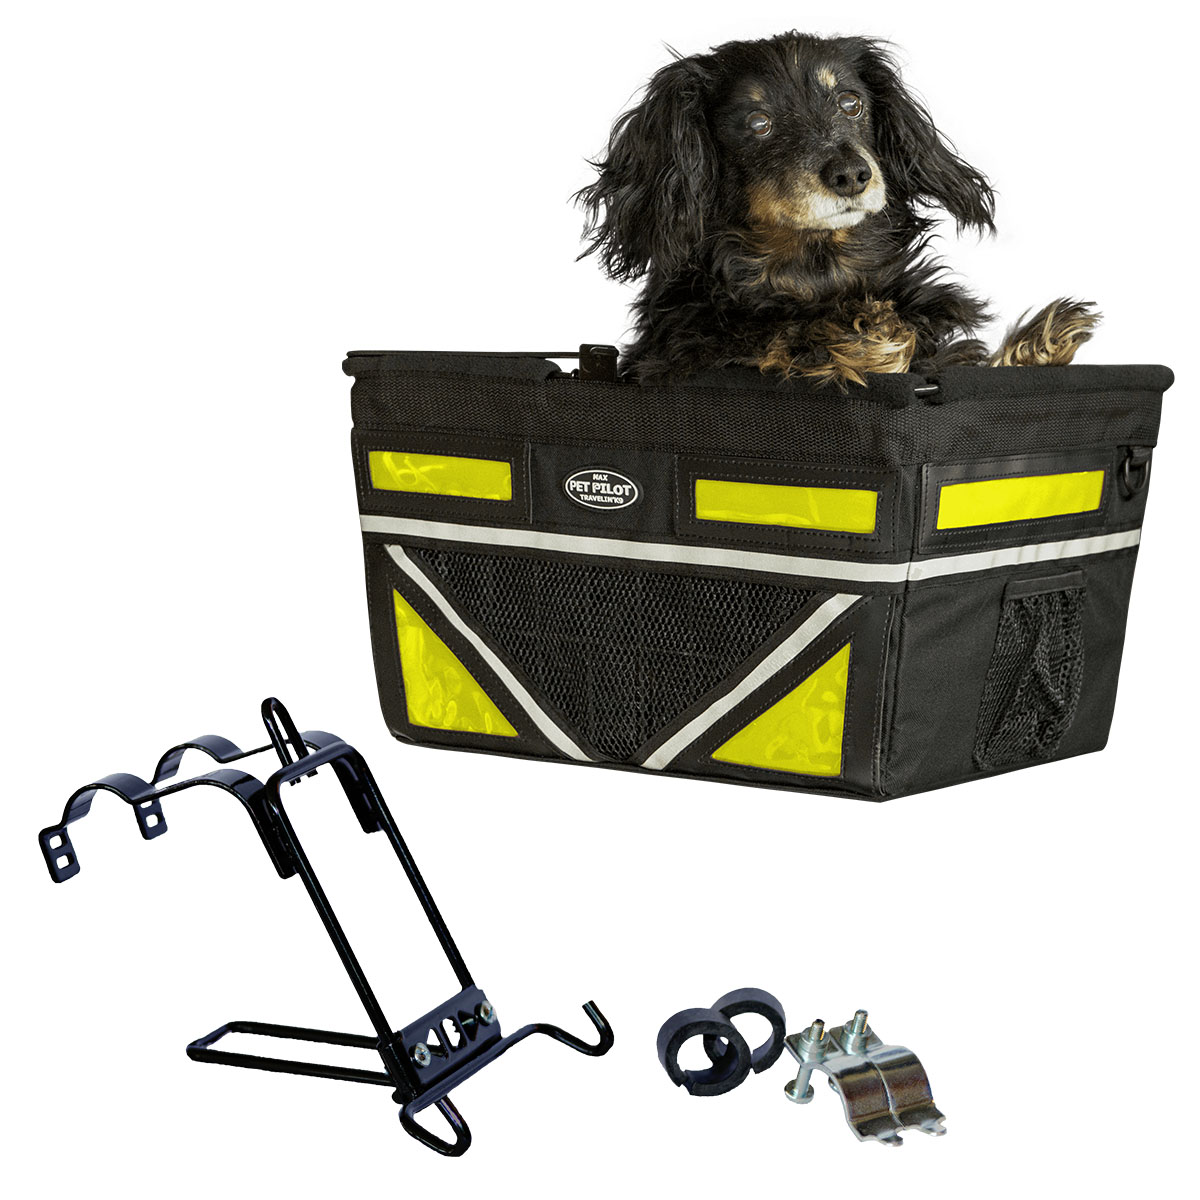 Ptx-8175 Max Dog Bicycle Basket Carrier, Neon Yellow